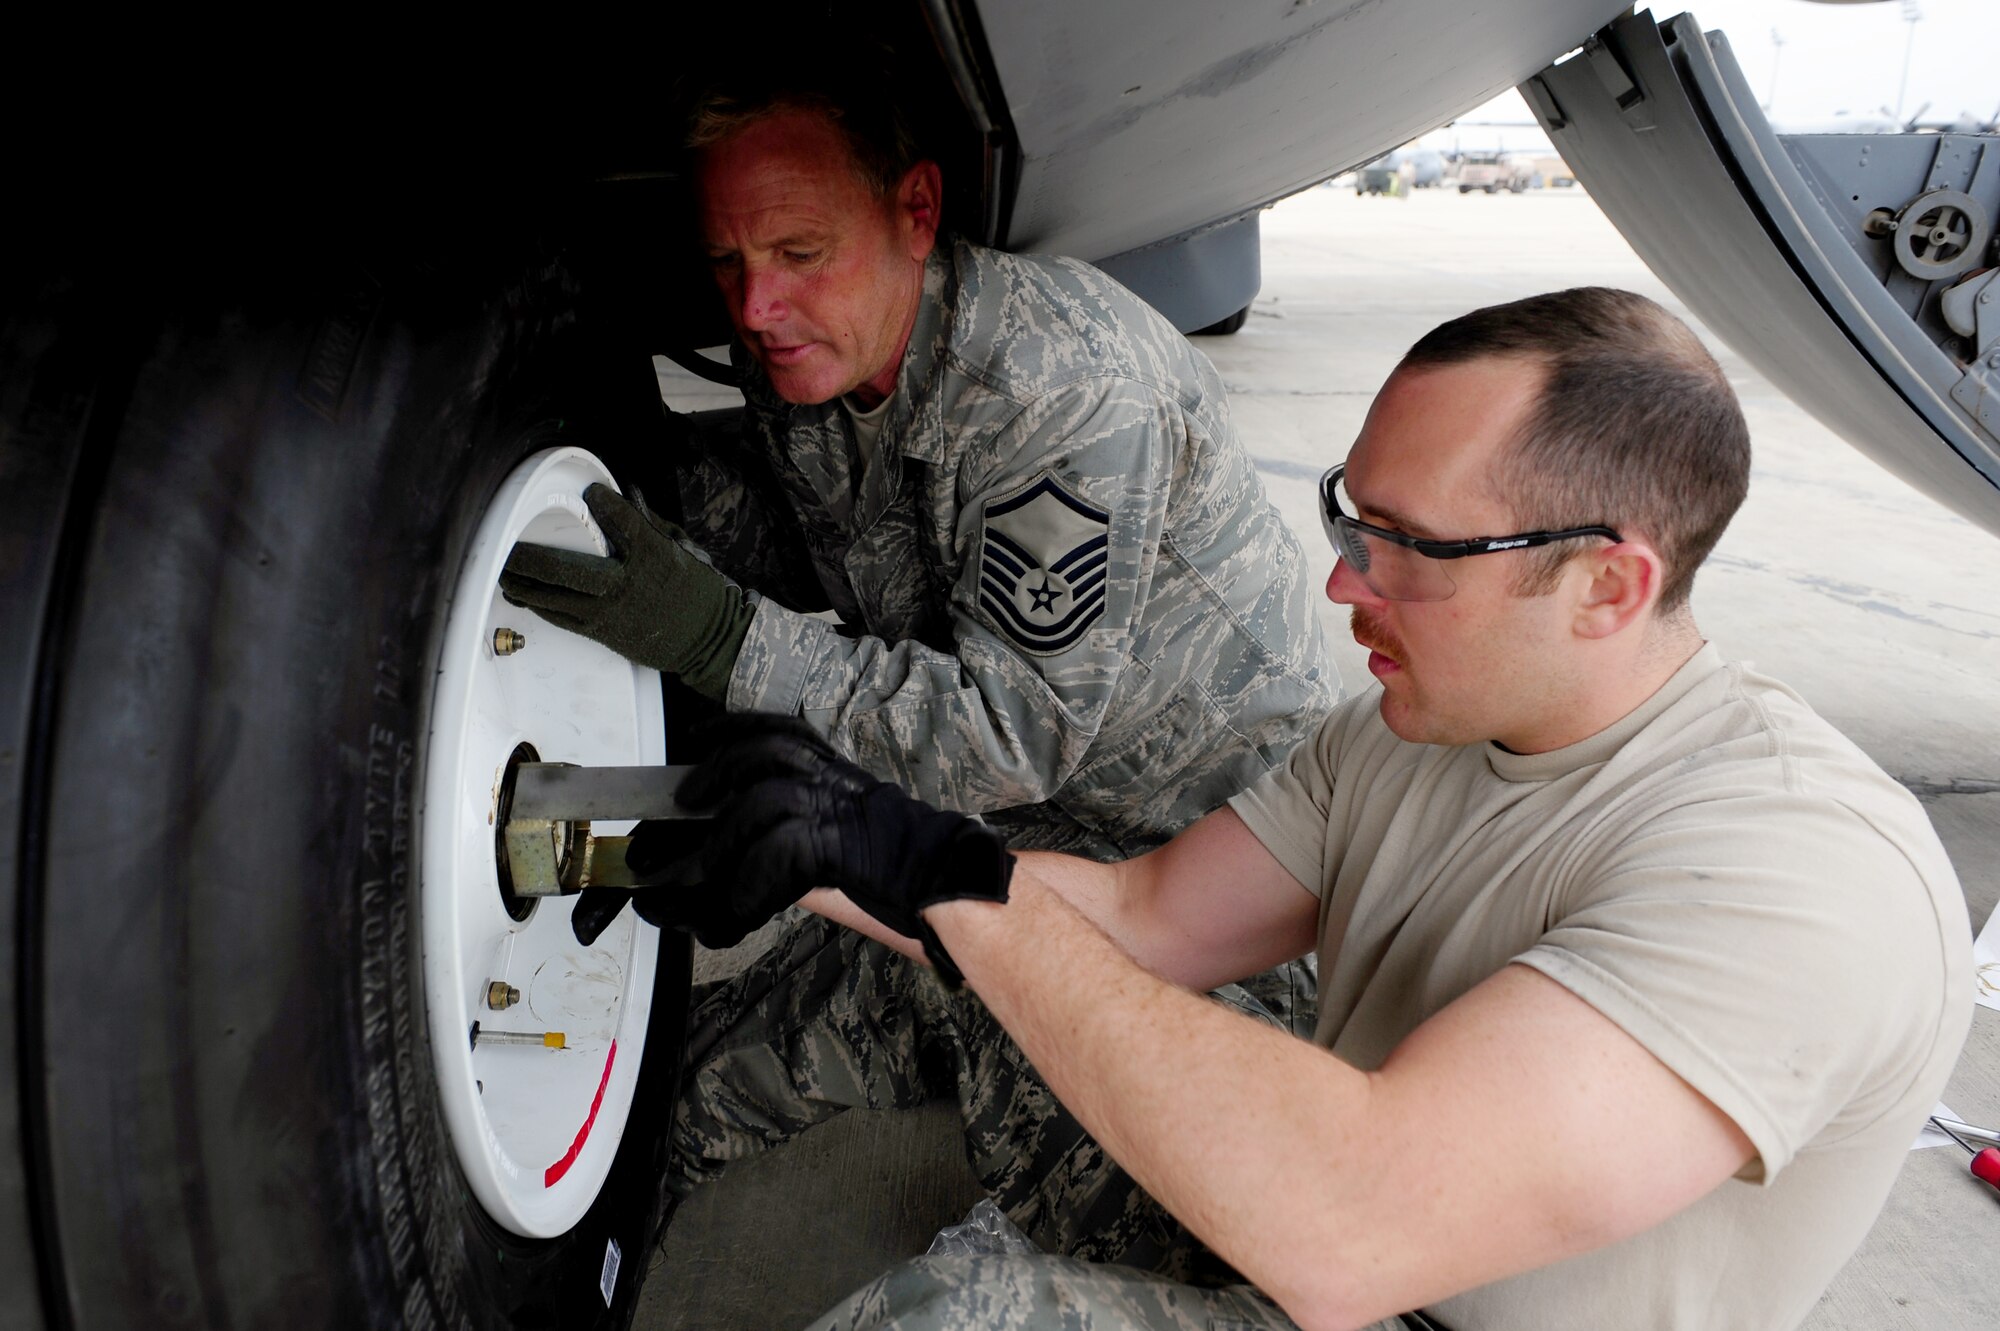 U.S. Air Force Staff Sgt. Justin Greenhow and Master Sgt. Jeff Dillon, 455th Expeditionary Aircraft Maintenance Squadron crew chiefs, secure a new tire to the nose landing gear of a C-130 Hercules aircraft during a tire change procedure at Bagram Airfield, Afghanistan, April 9, 2011. Greenhow and Dillon are deployed from the Delaware Air National Guard’s 166th Aircraft Maintenance Squadron, New Castle, Del., supporting Operation Enduring Freedom. (U.S. Air Force photo/Master Sgt. William Greer)